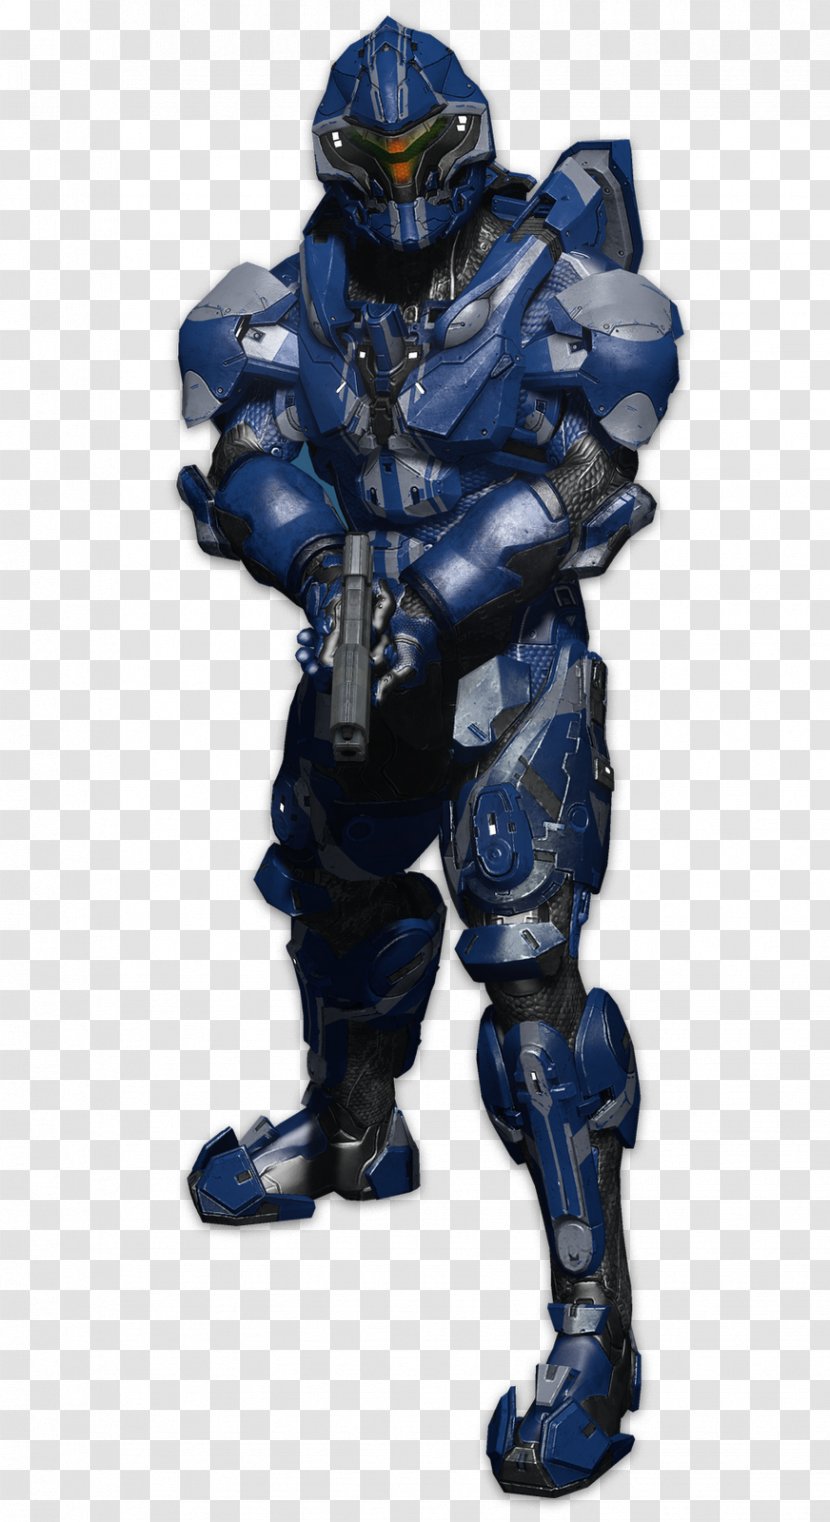 Halo 4 Pathfinder Roleplaying Game Halo: Reach 3 Master Chief - 5 Guardians - Irradiation Transparent PNG